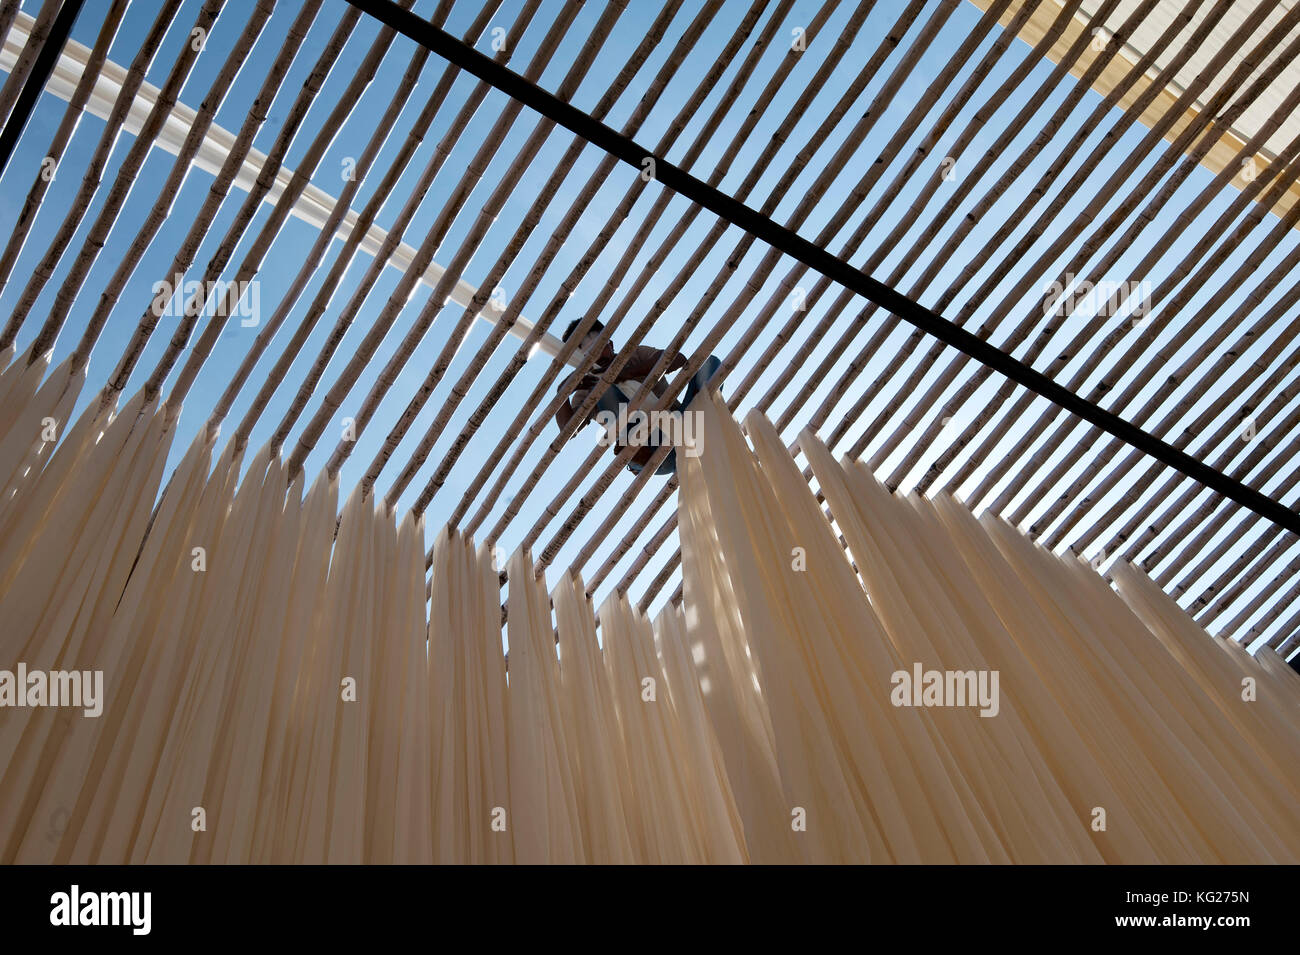 Man on top of bamboo structure hanging washed bolts of cotton fabric to dry before being hand block printed, Bagru, Rajasthan, India, Asia Stock Photo